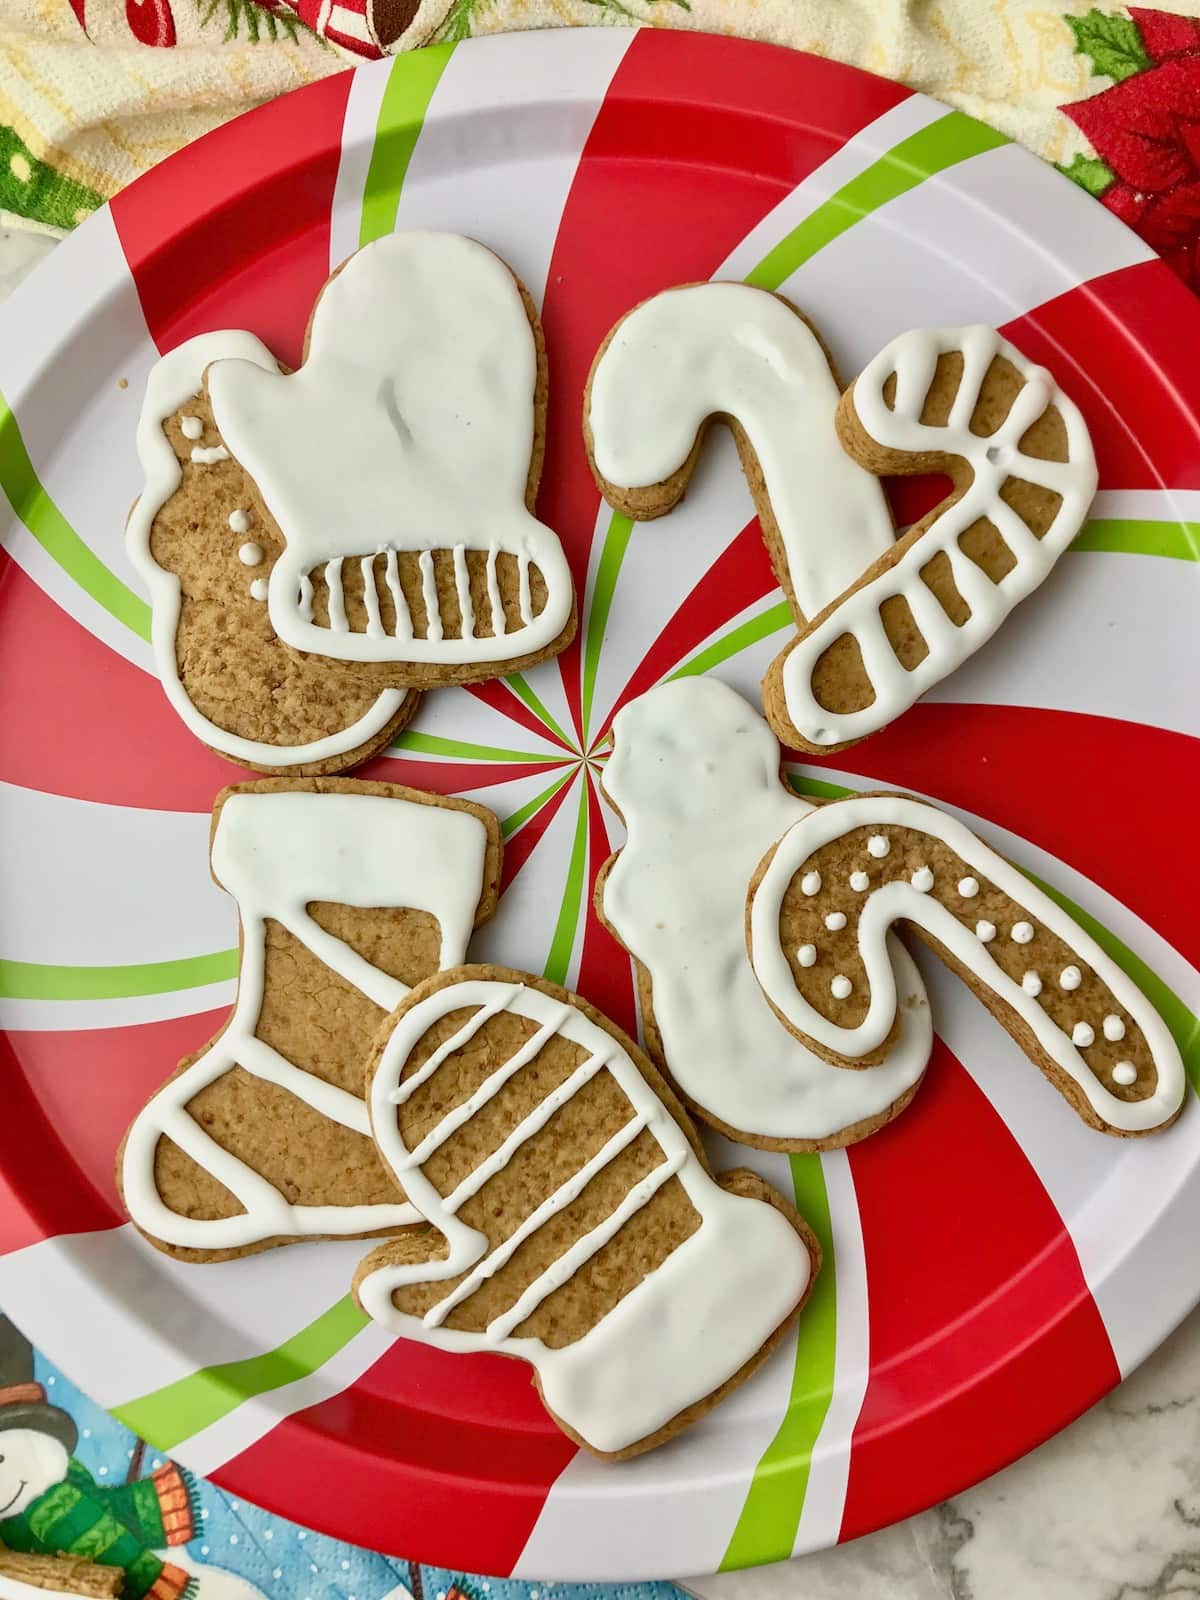 A plate of Christmas shaped sugar cookies with white icing.